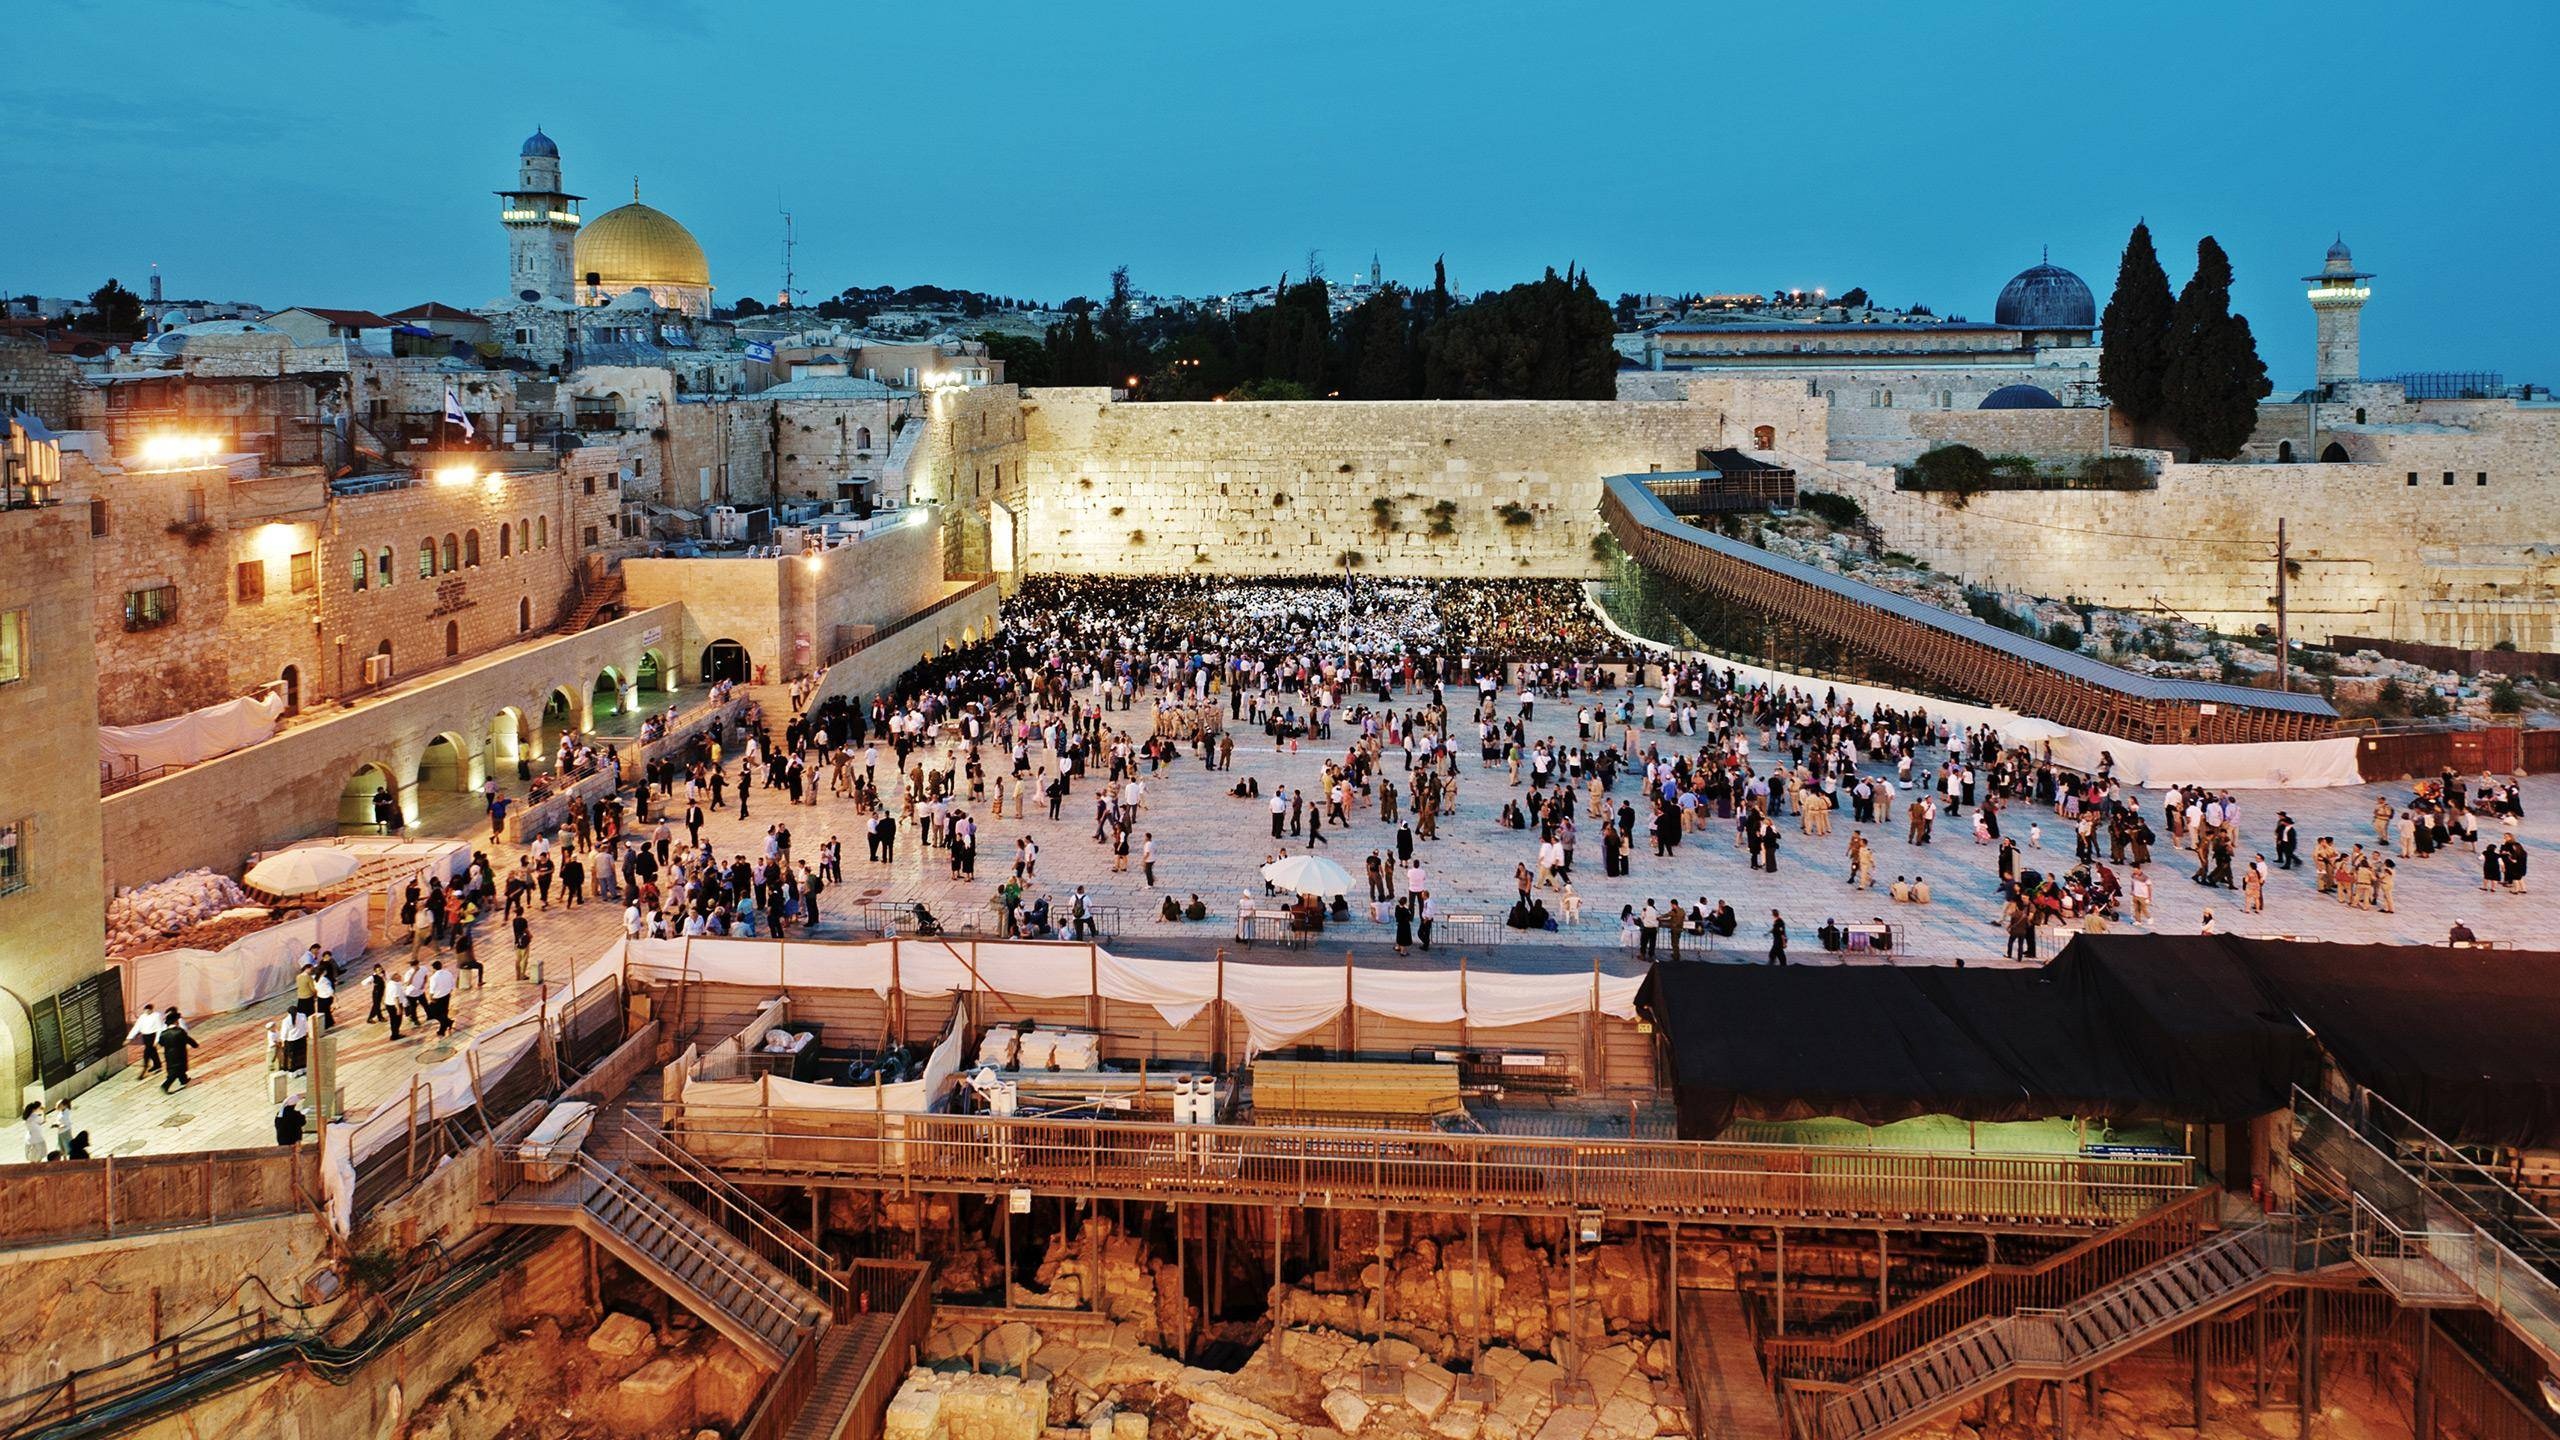 Jerusalem: Western Wall, The holiest place where Jews are permitted to pray outside the previous Temple Mount platform. 2560x1440 HD Wallpaper.